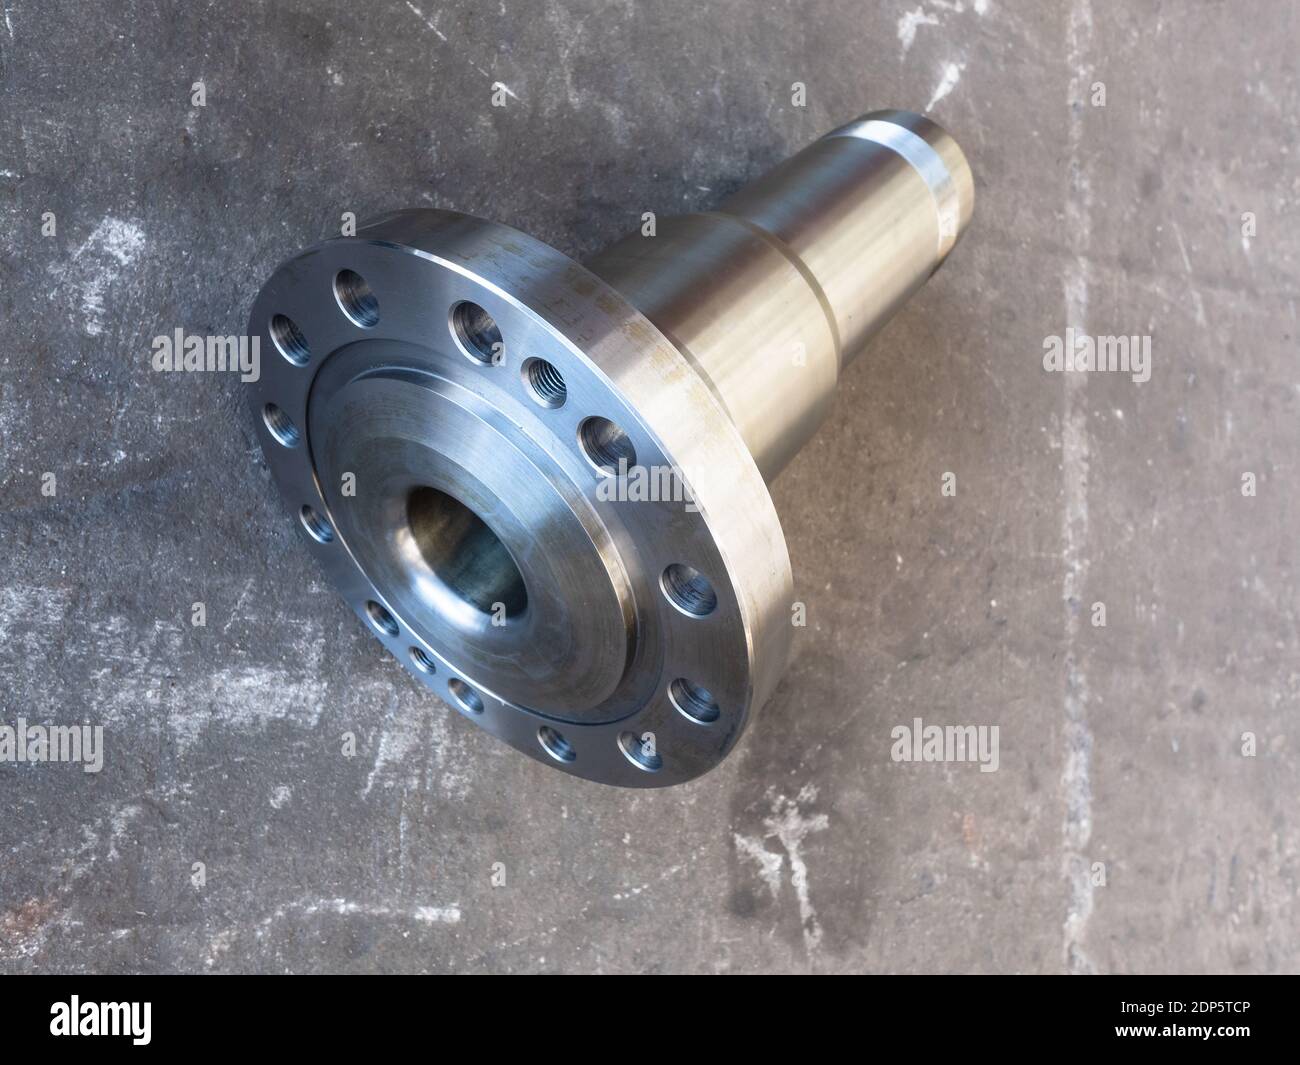 Stainless steel, heavy duty industrial stub shaft on a dirty concrete floor. Stock Photo